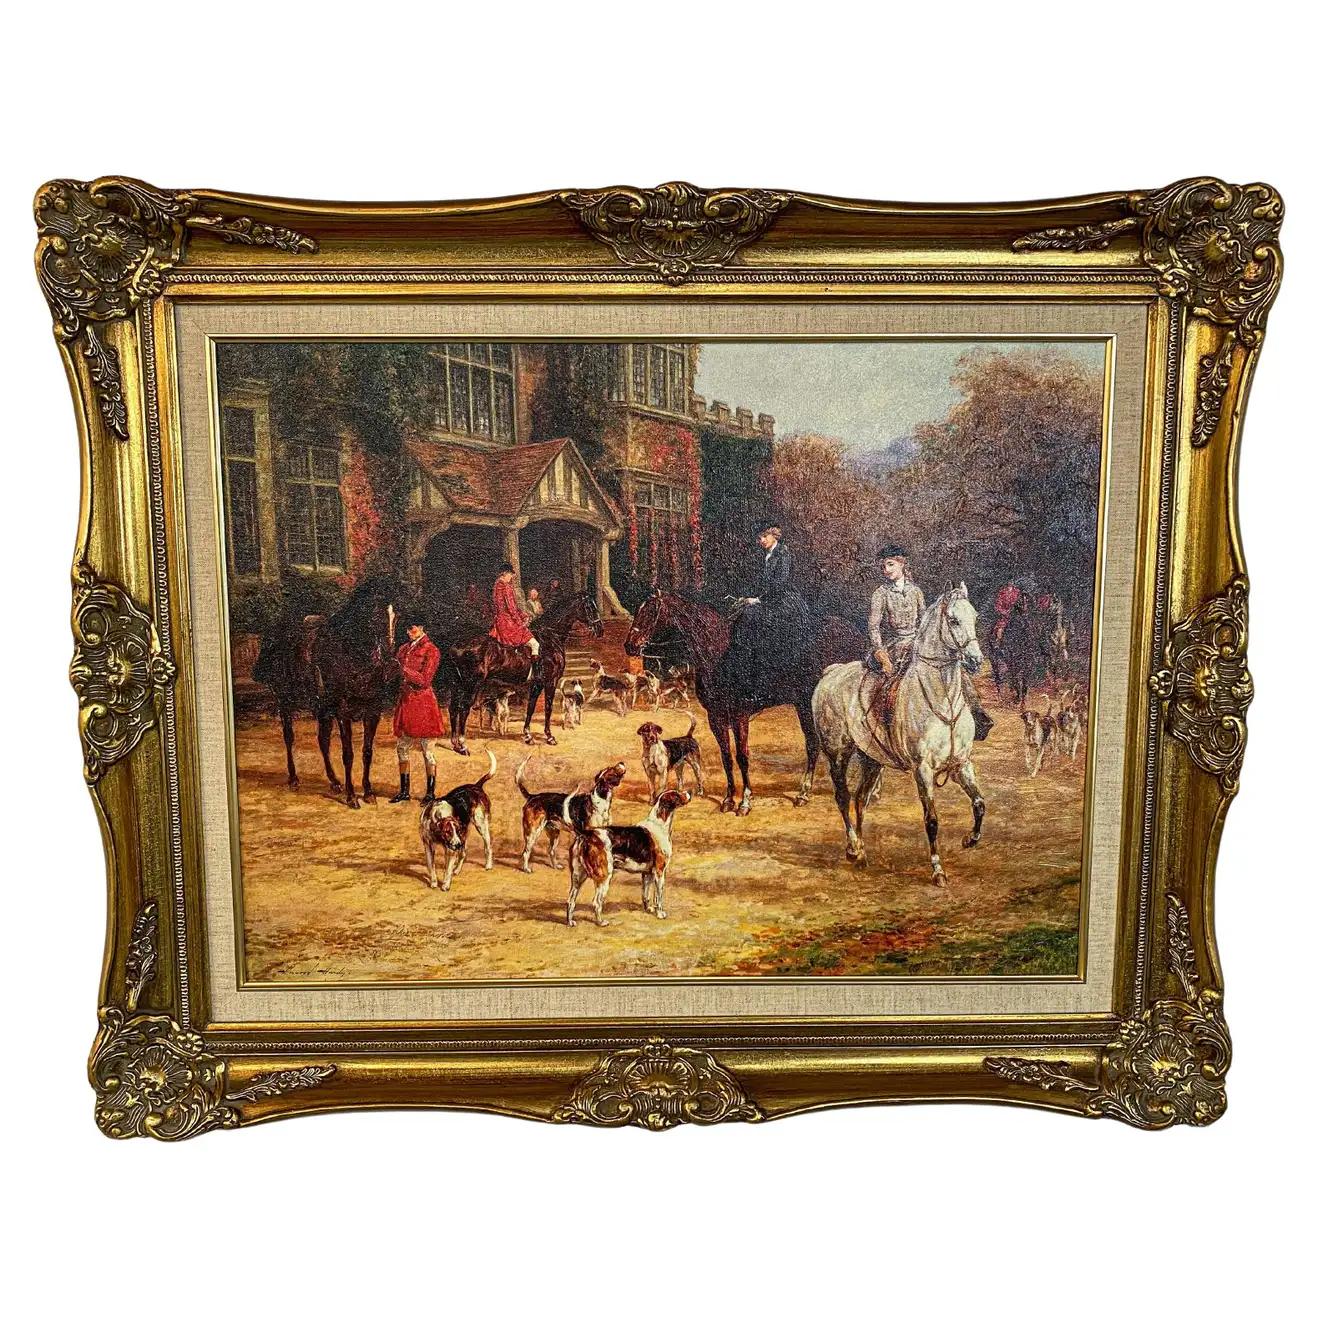 An elegant print canvas painting of English hunters and hounds in a countryside estate after the the British artist Heywood Hardy ( English, 1842-1933) who was trained at the École des Beaux-Arts in Paris. Heywood Hardy specialty was the painting of